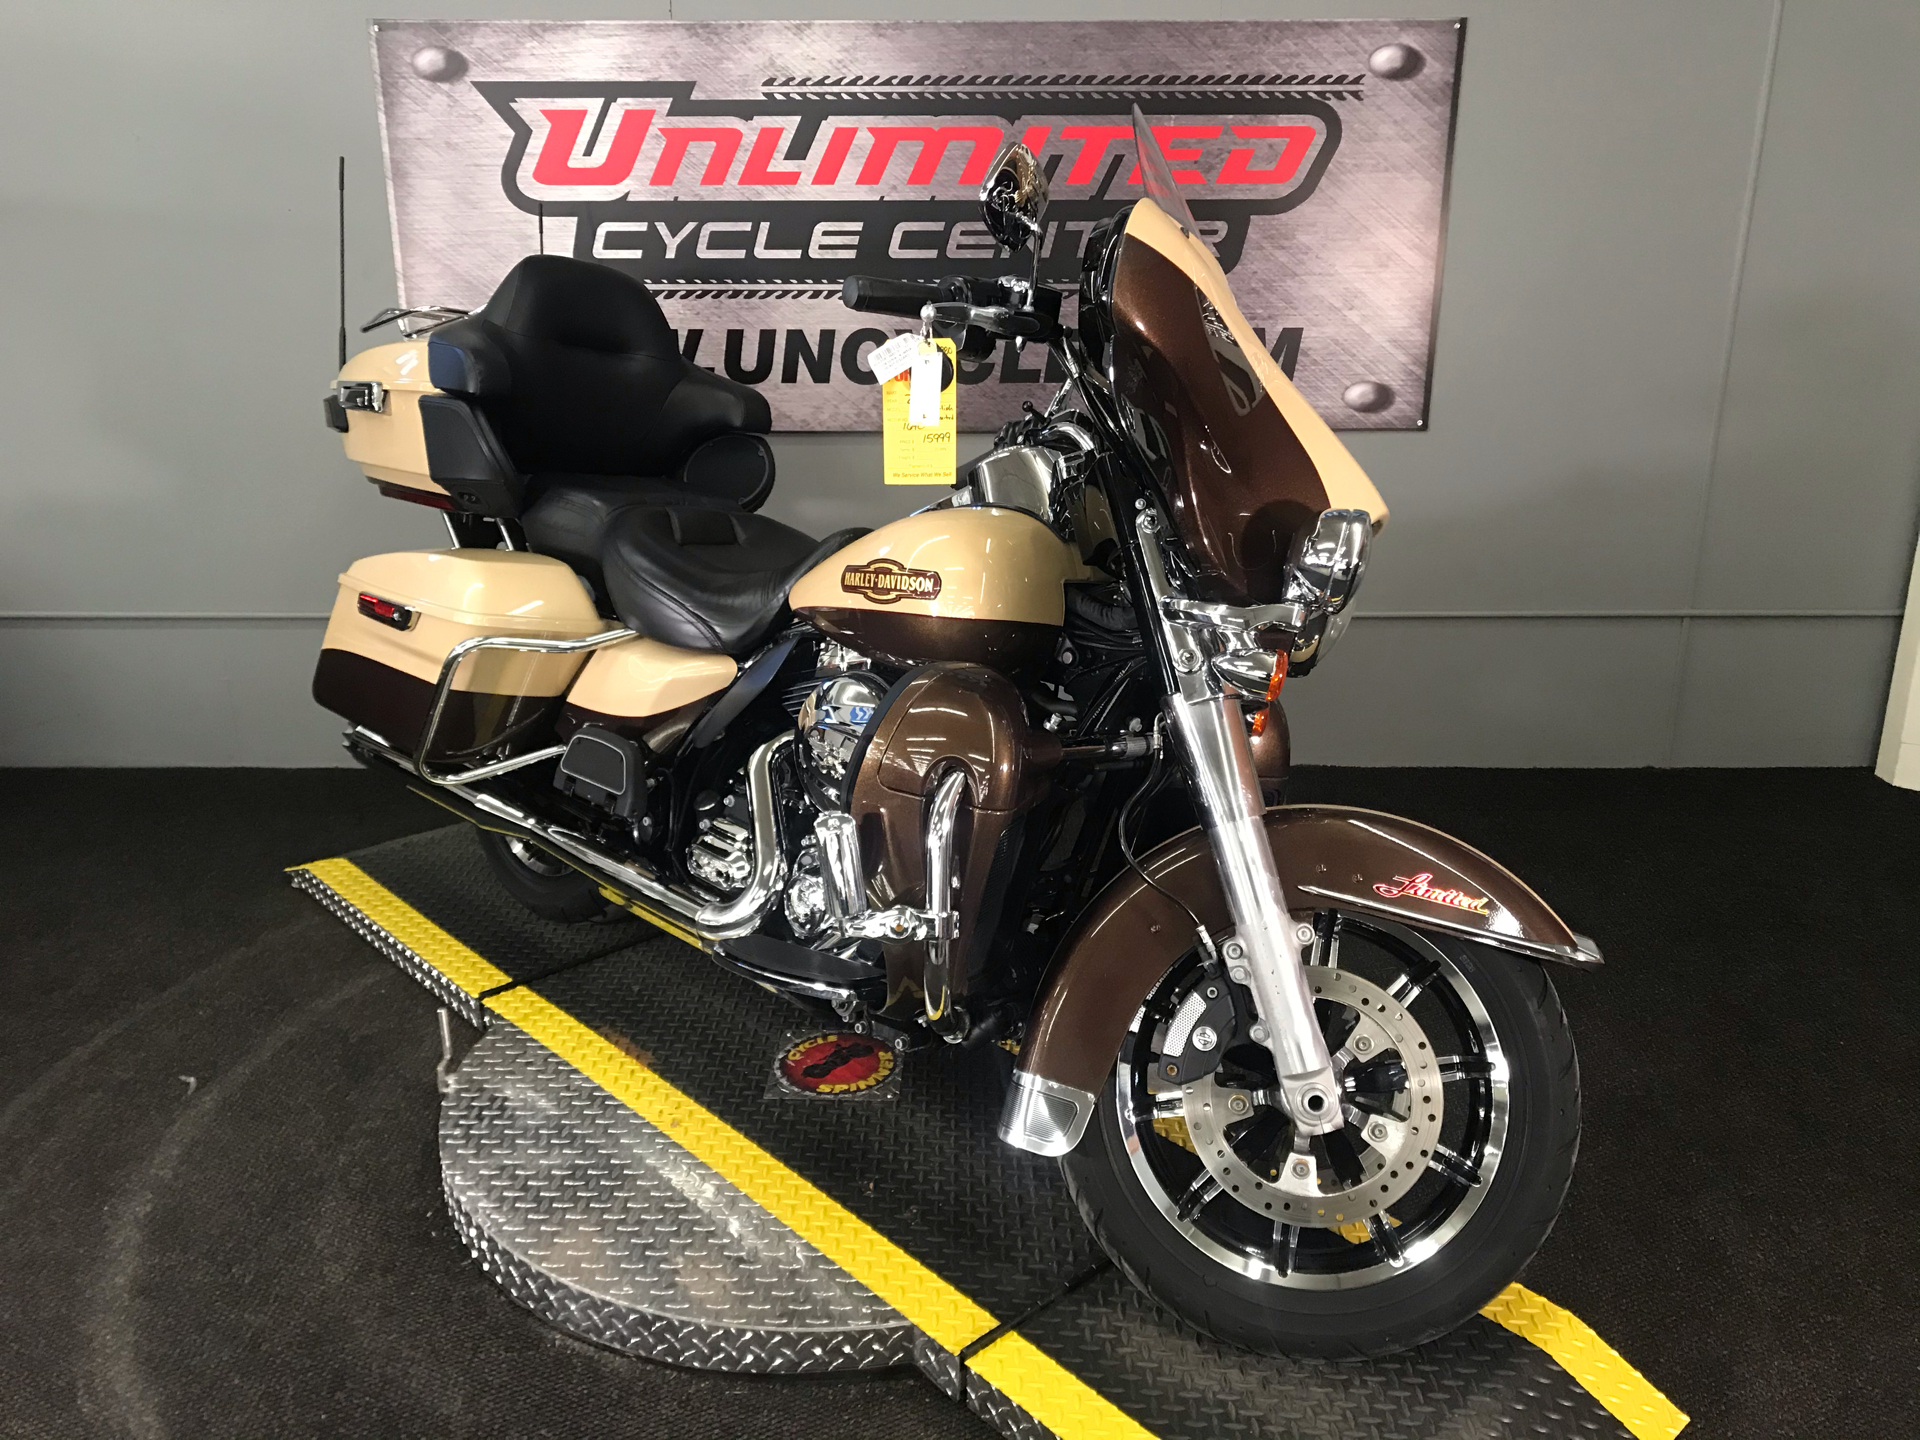 Used 2014 Harley Davidson Ultra Limited Motorcycles In Tyrone Pa 633694 Sand Pearl Canyon Brown Pearl